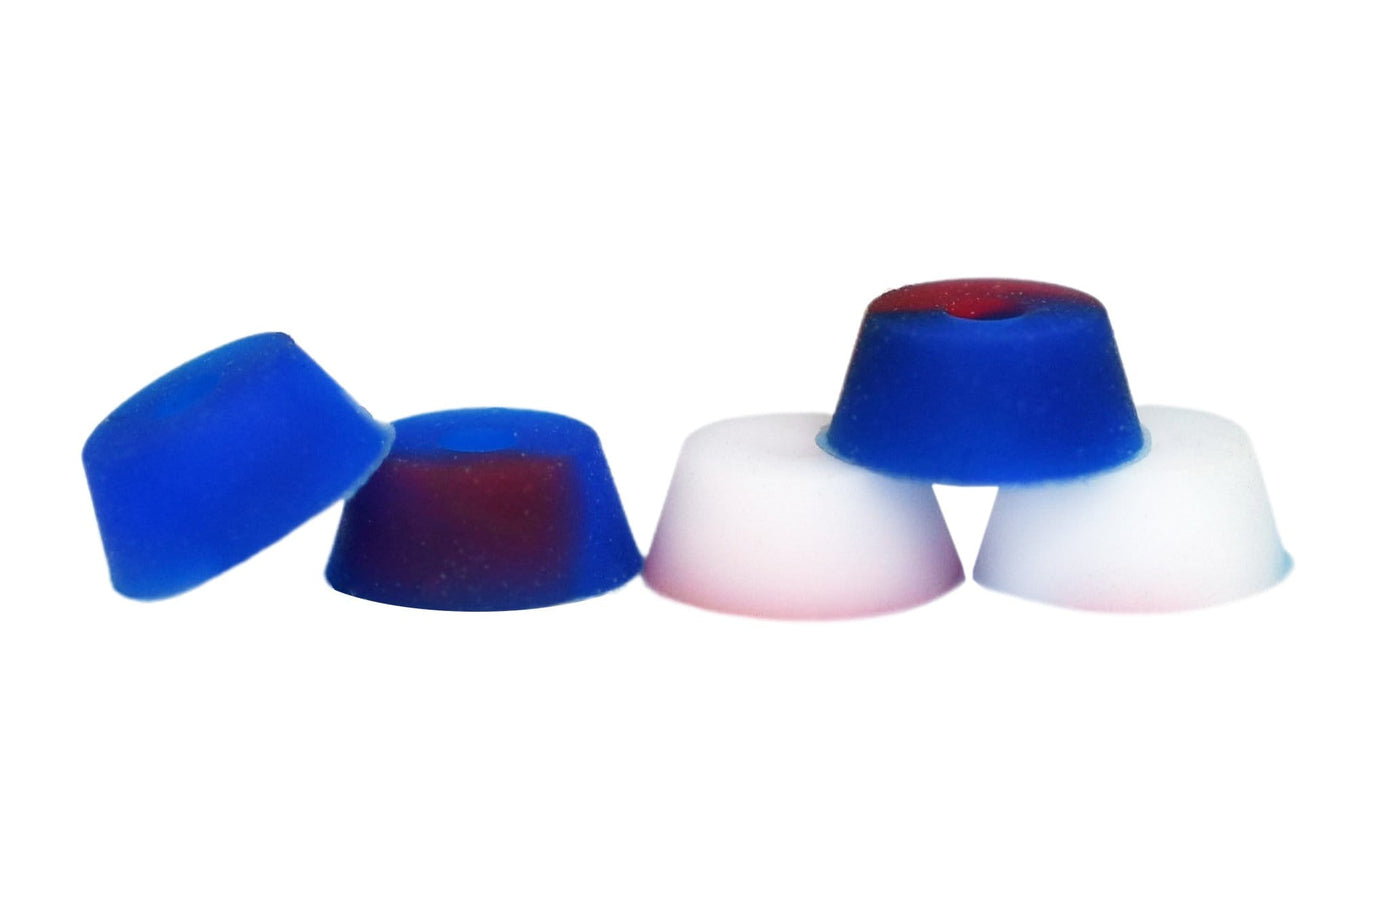 Teak Tuning Bubble Bushings Pro Duro Series - Multiple Durometers - Red, White and Blue Swirl 51A